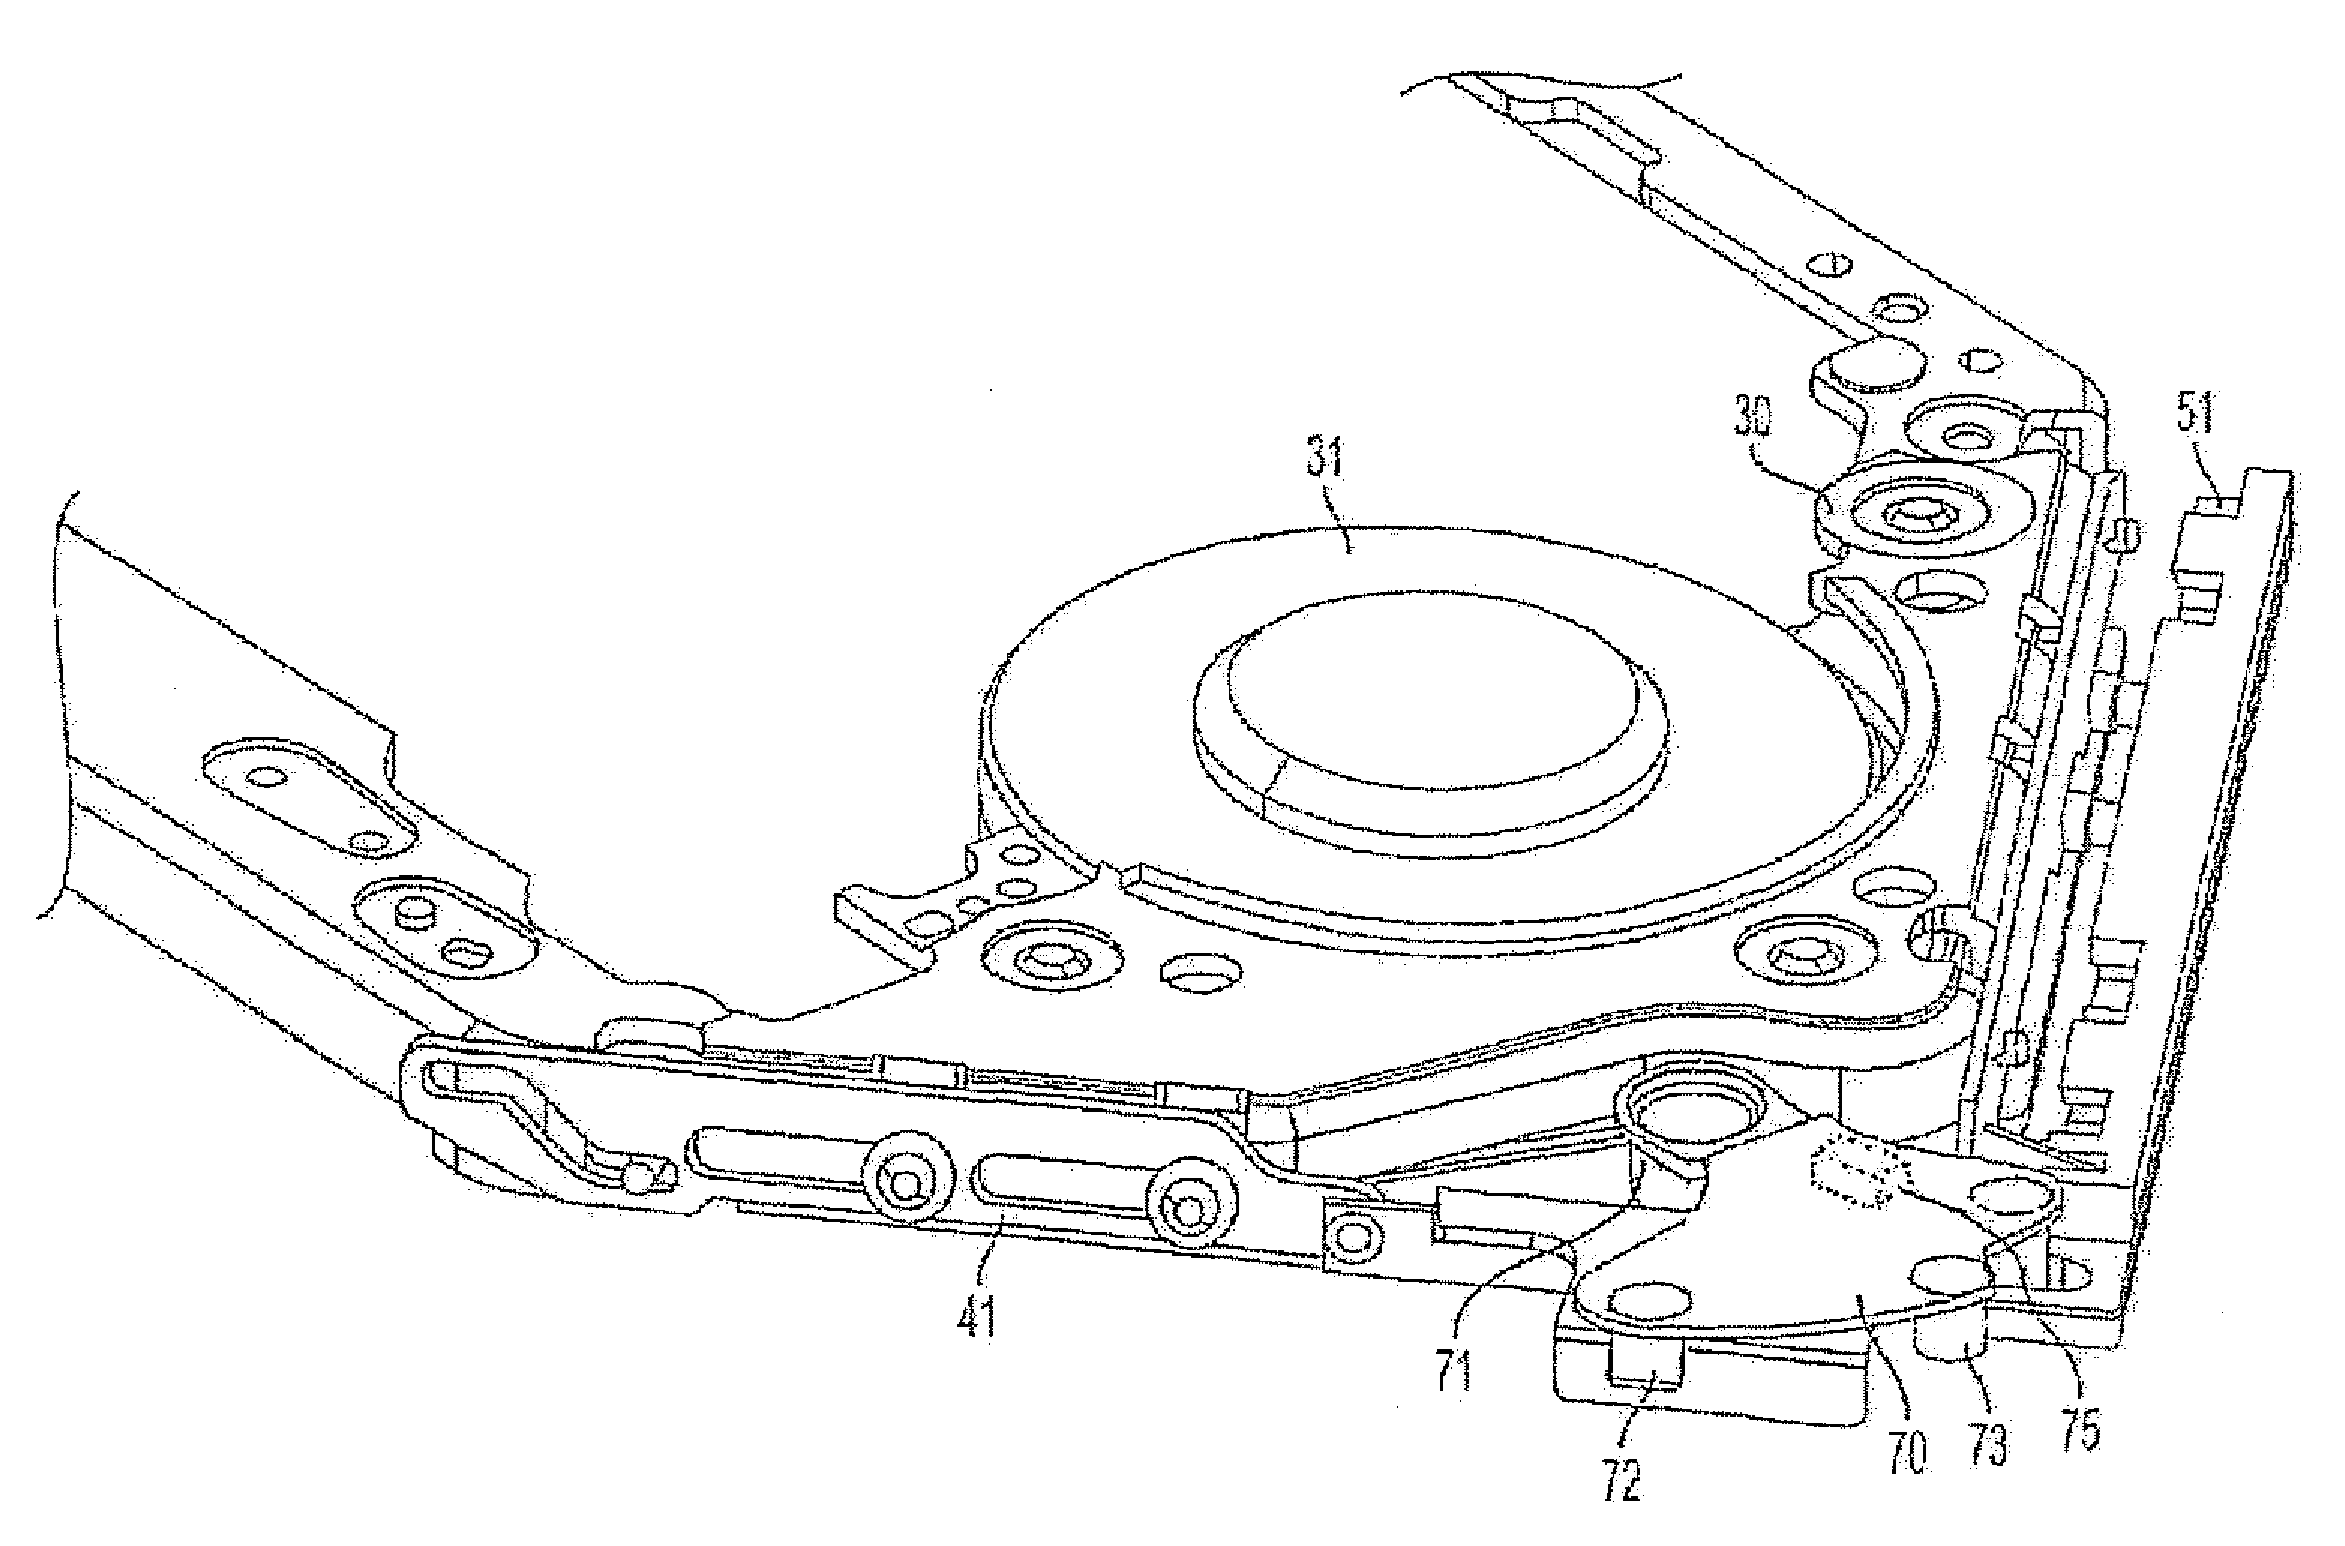 Disk apparatus with resilient member on cam mechanism connecting a main slider to a sub-slider